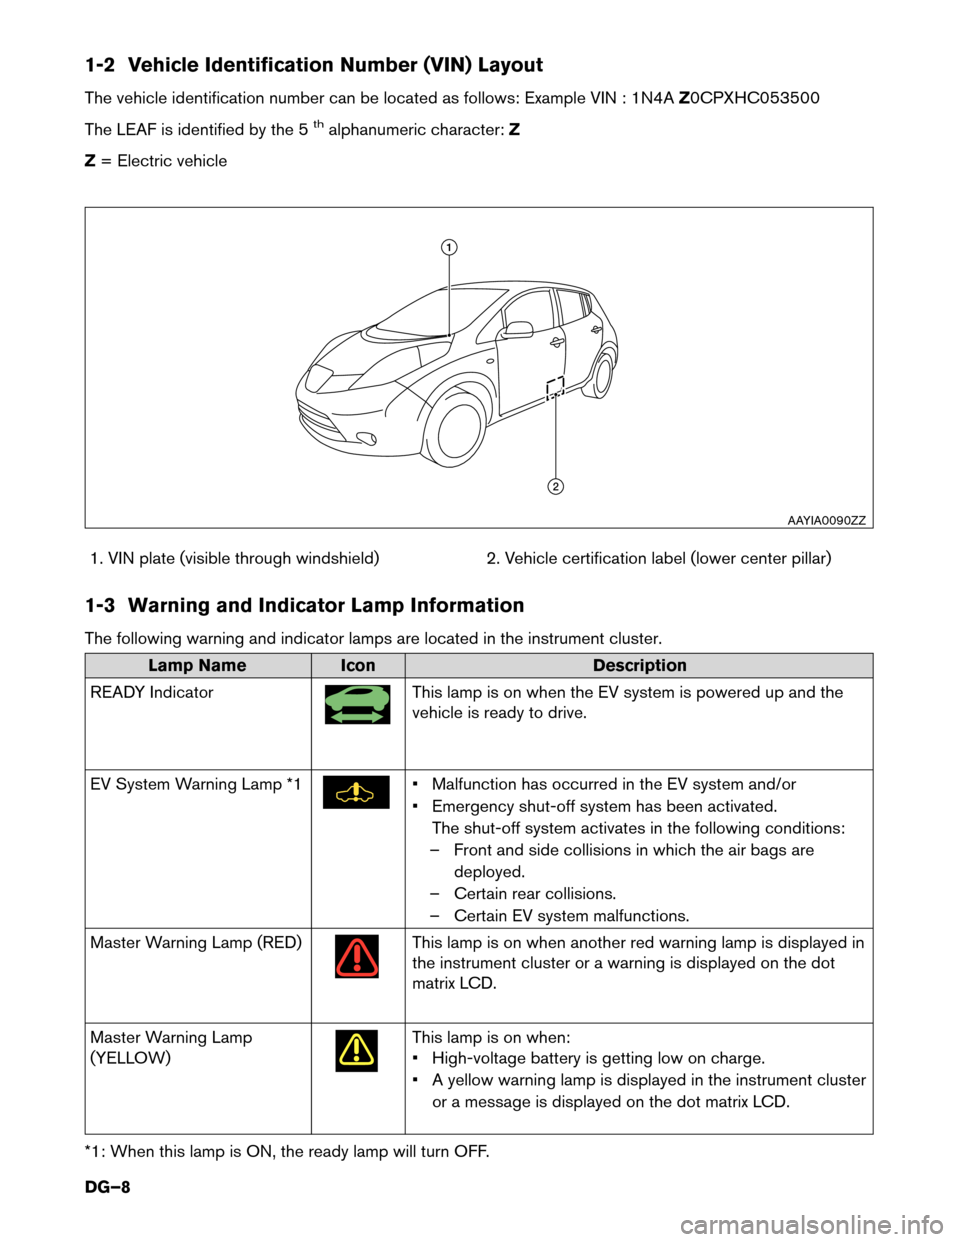 NISSAN LEAF 2017 1.G Dismantling Guide 1-2 Vehicle Identification Number (VIN) Layout
The
vehicle identification number can be located as follows: Example VIN : 1N4A Z0CPXHC053500
The LEAF is identified by the 5
thalphanumeric character: Z